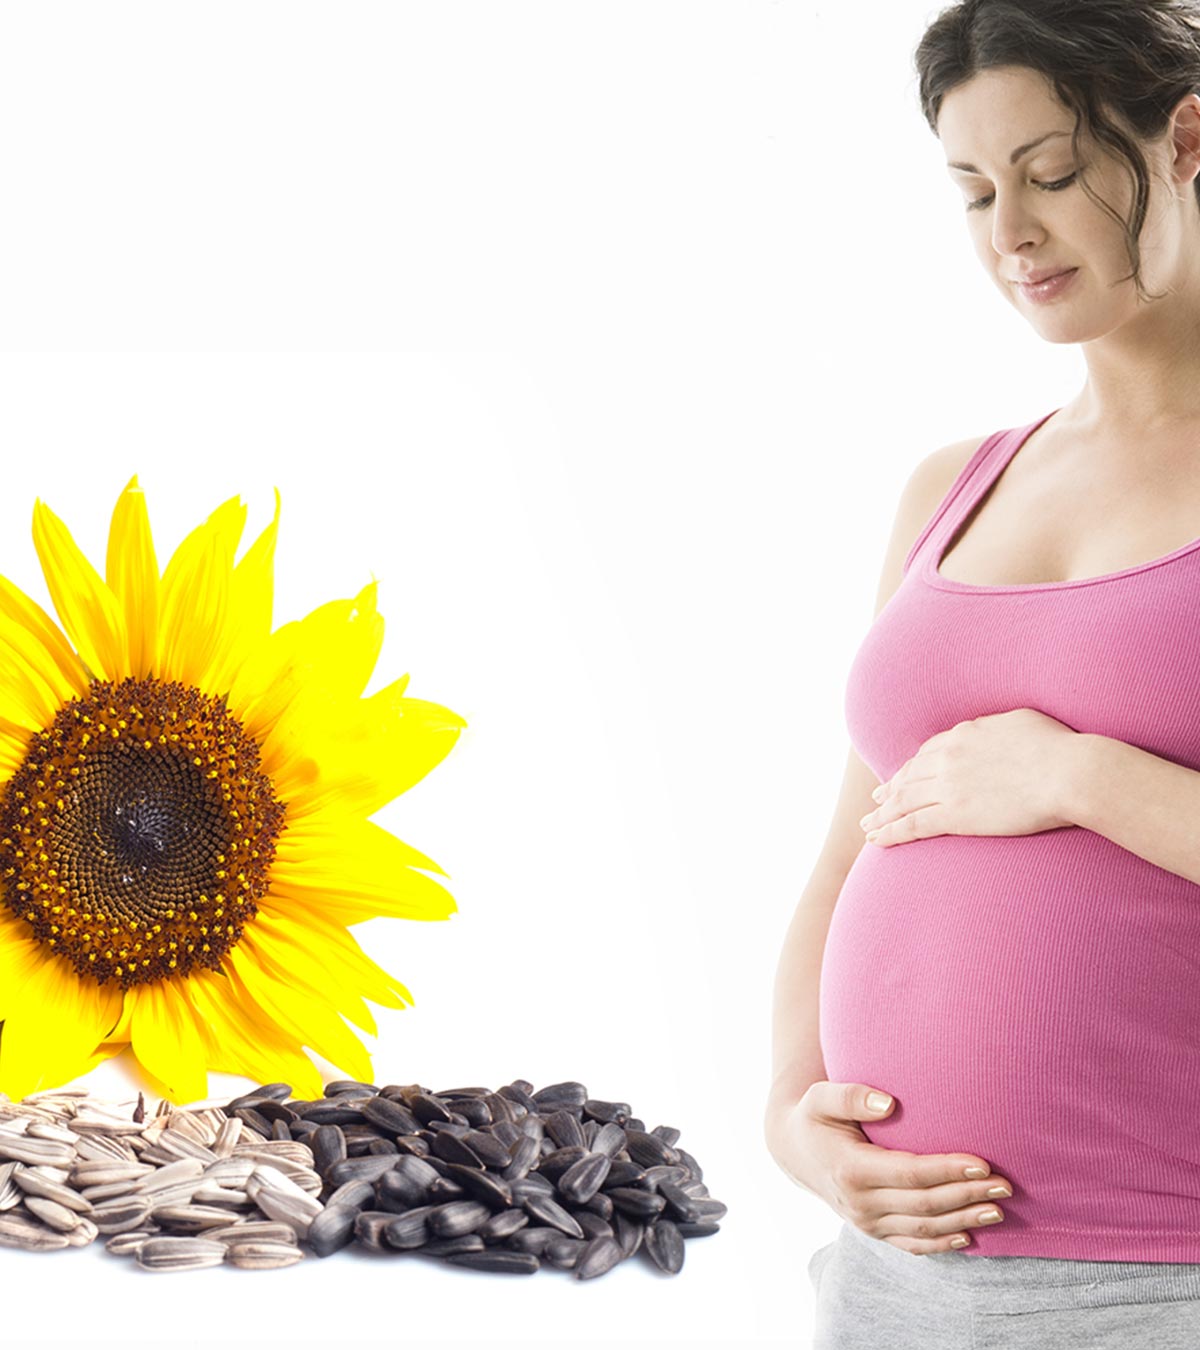 5 Amazing Benefits Of Eating Sunflower Seeds During Pregnancy